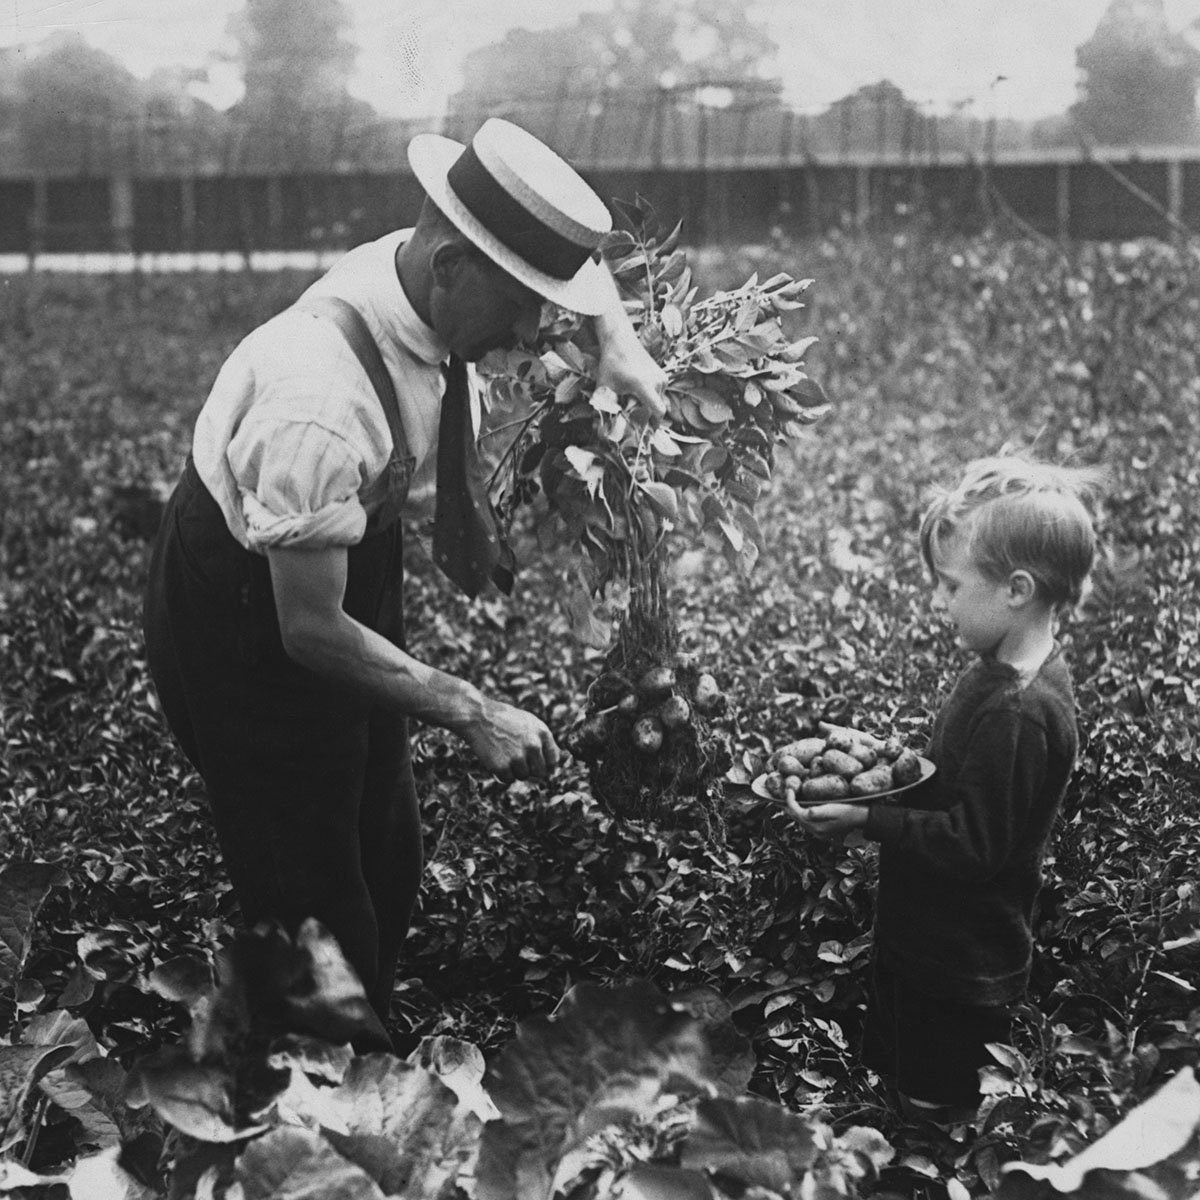 (Original Caption) "Dig For Victory" - Allotments At Dulwich. (Photo by © Hulton-Deutsch Collection/CORBIS/Corbis via Getty Images)